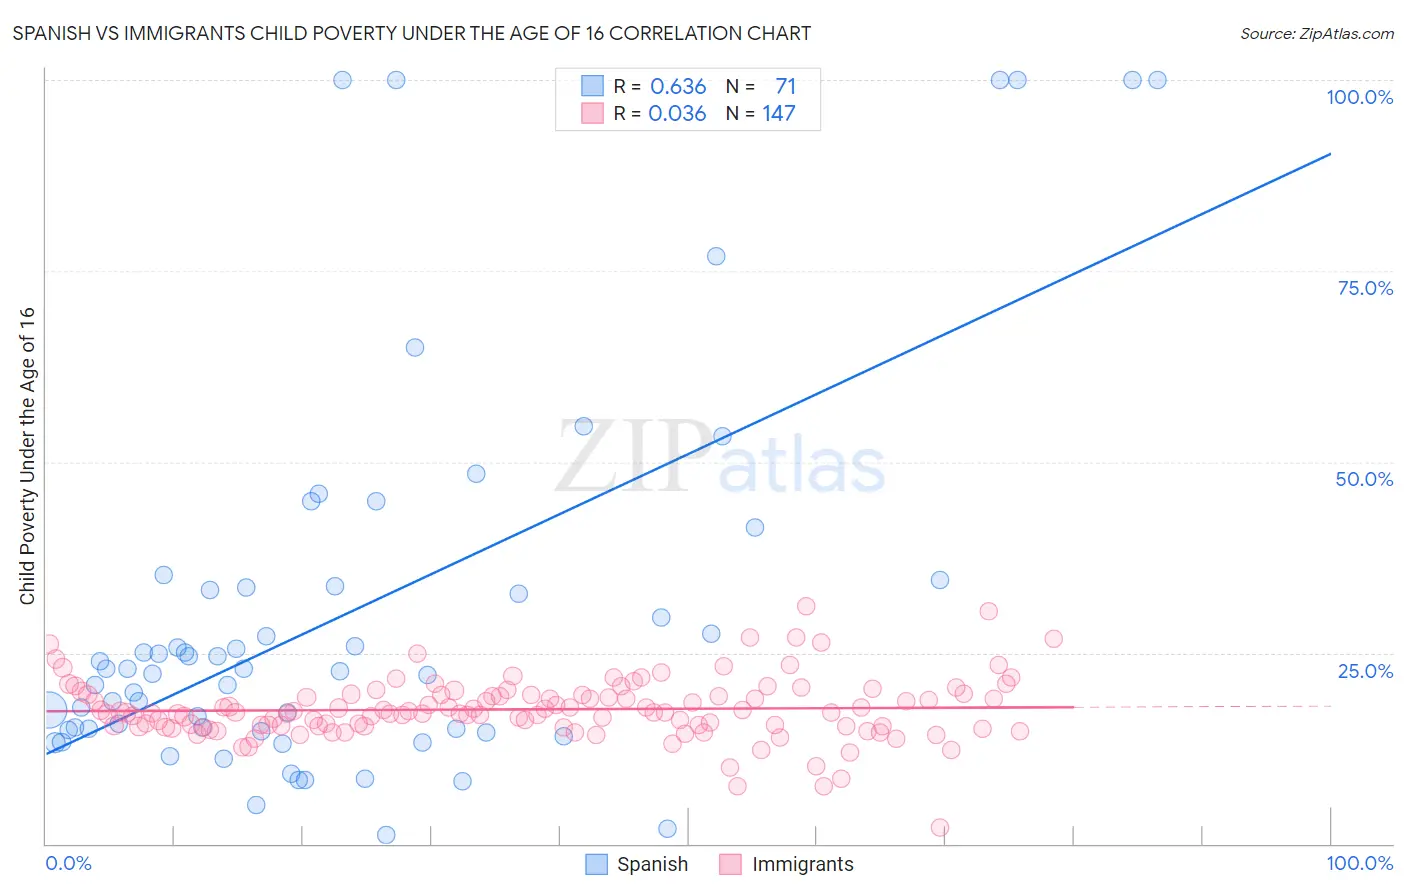 Spanish vs Immigrants Child Poverty Under the Age of 16